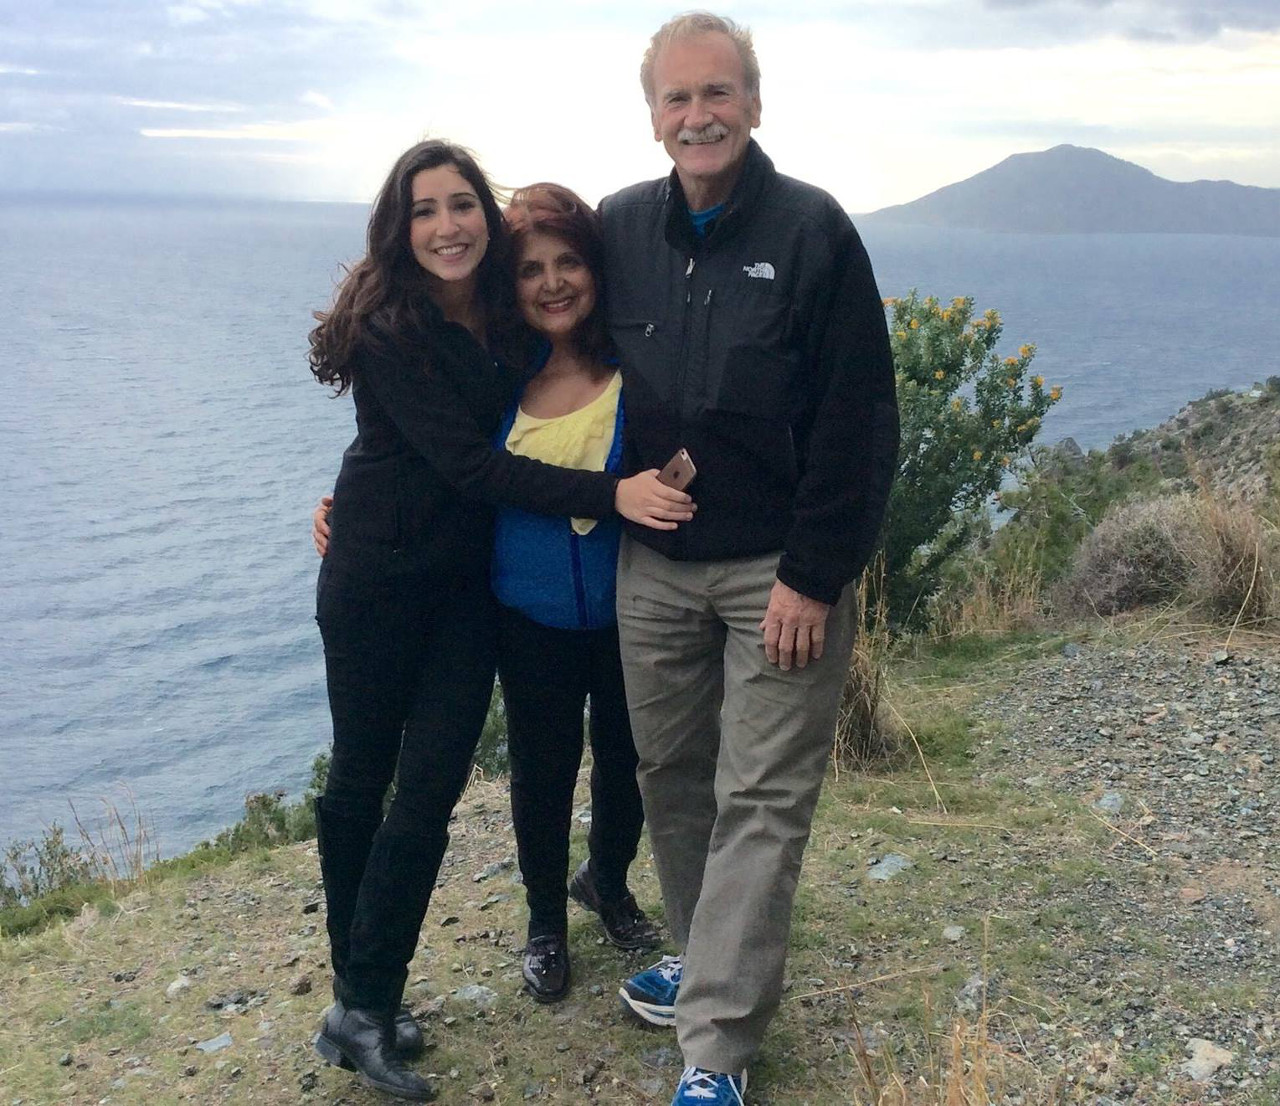 The Woodhouse family from Great Neck traveled to Lesbos, Greece to provide assistance to Syrian refugees in January. From left to right: Alexandra Woodhouse, Latifa Woodhouse and Colin Woodhouse. (Photo credit: Latifa Woodhouse/Facebook)